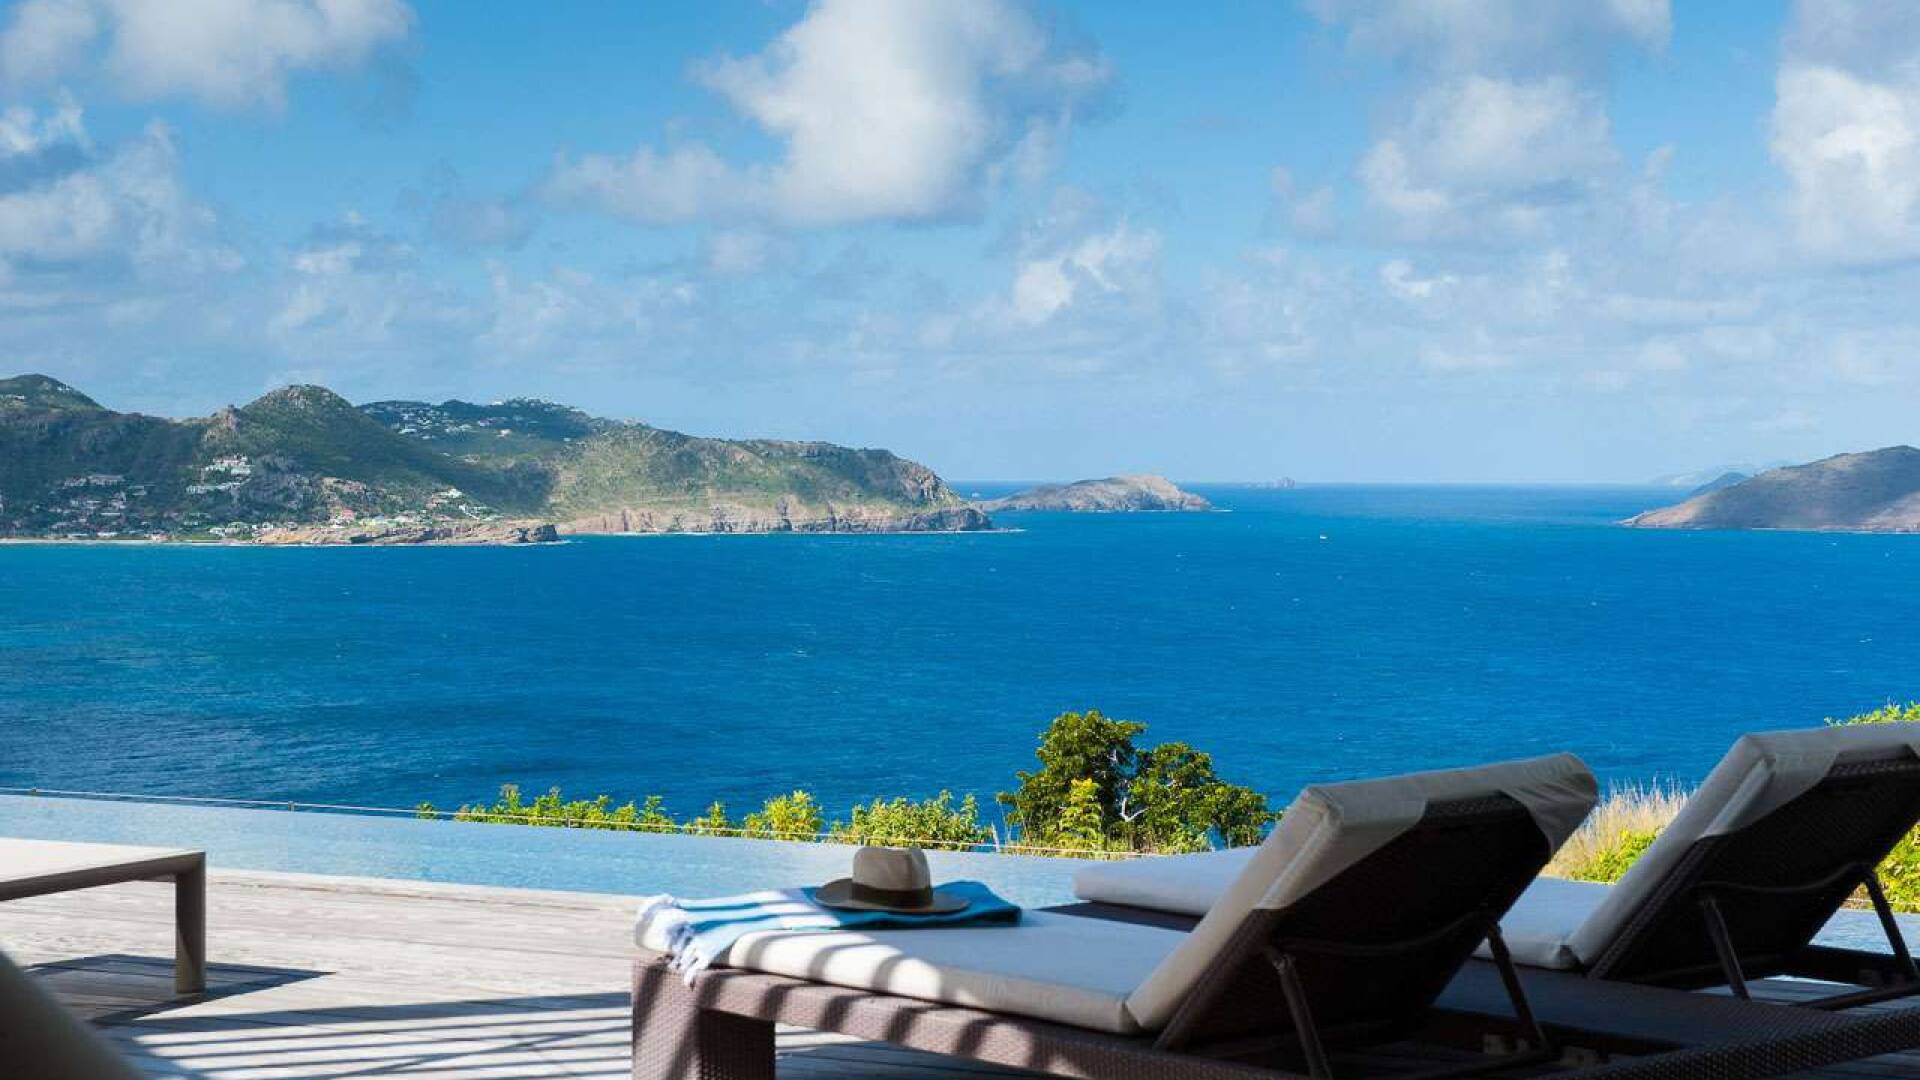 The view from WV PYR, Pointe Milou, St. Barthelemy